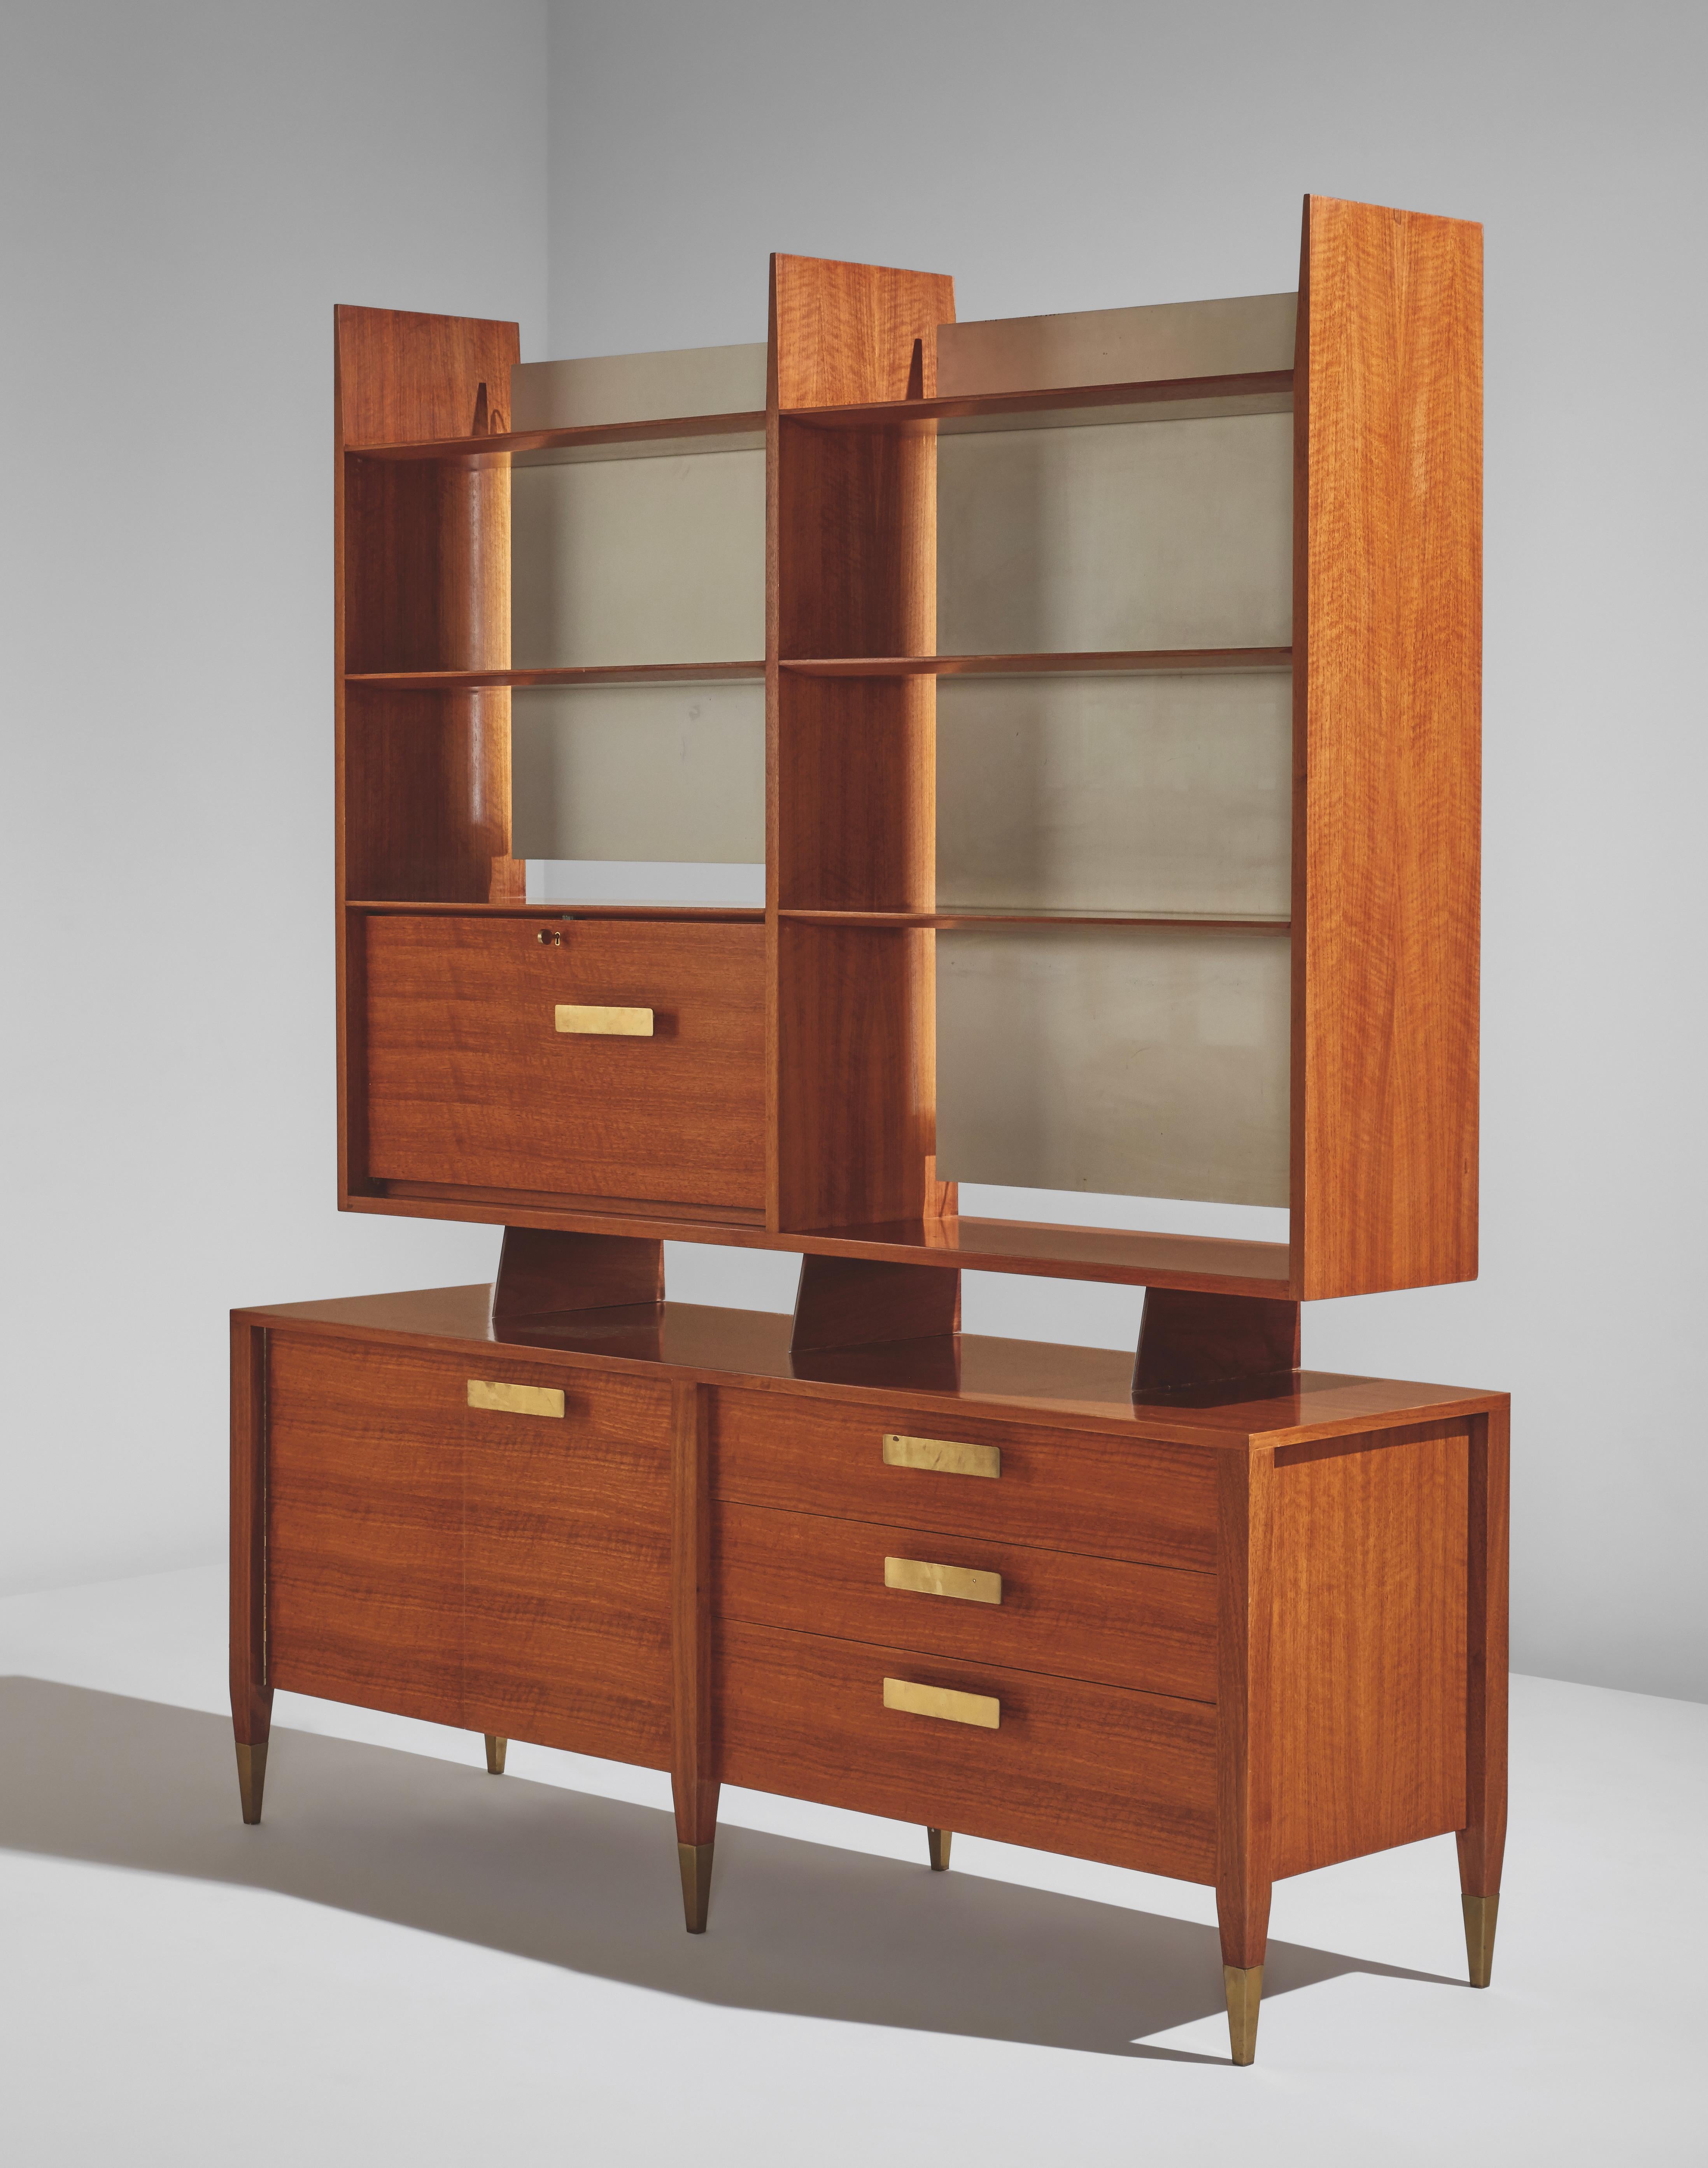 From the 'Modern by Singer' series for Singer & Sons, early 1950s
Rare tall cabinet in walnut, the shelving in the upper section backed by soft white lacquered panels concealing updated electrical light sources, with brass handles and sabots on